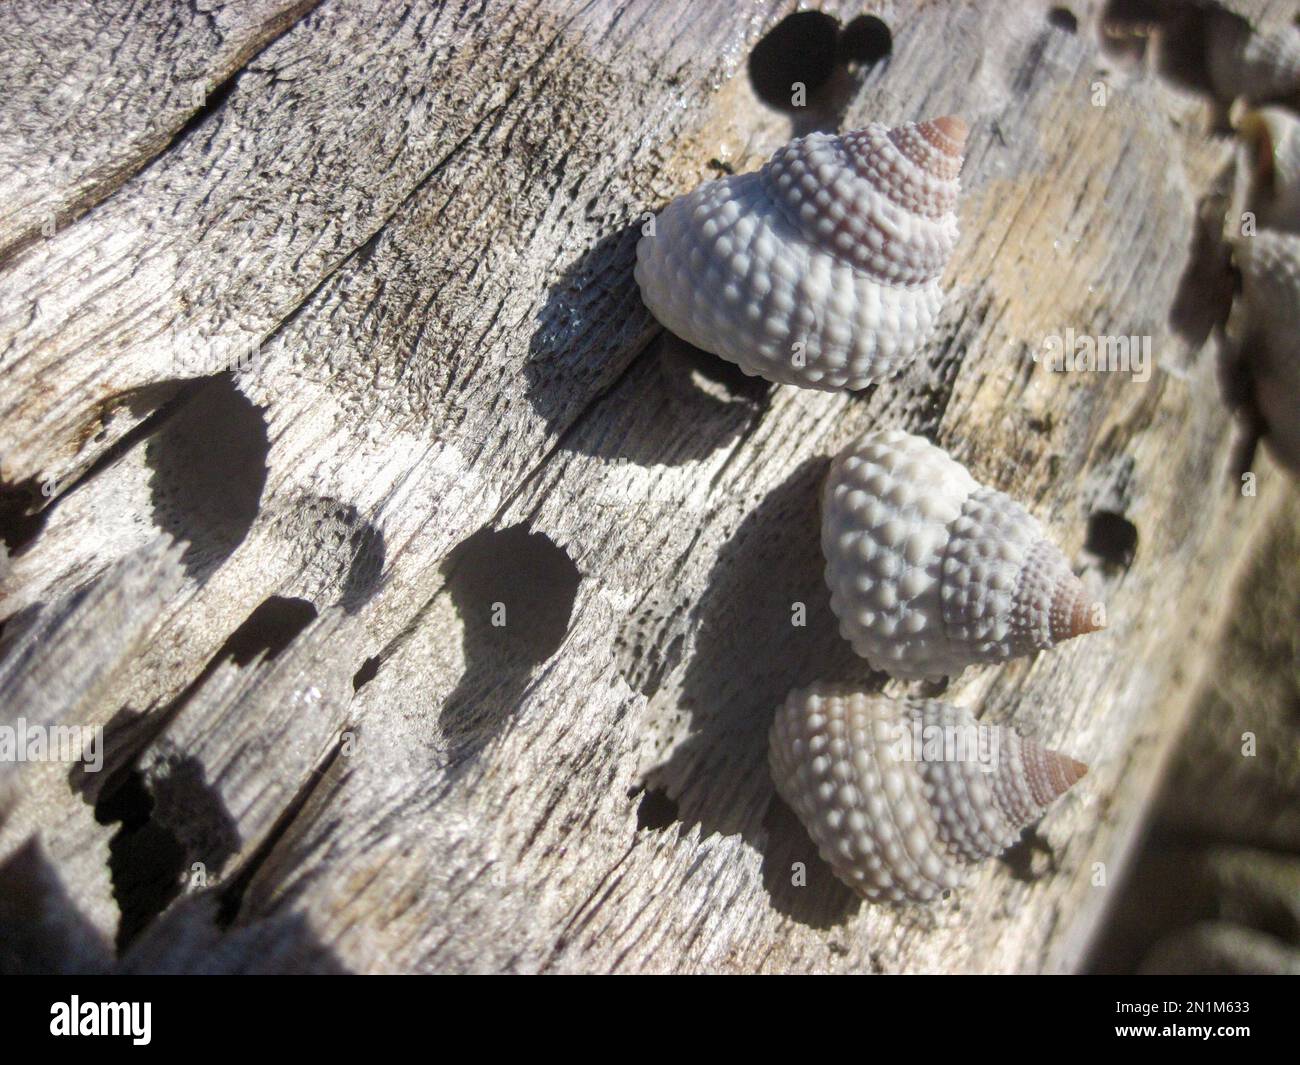 Close up of a group of sea snails attached to an old and dry trunk of a tree near the beach Stock Photo